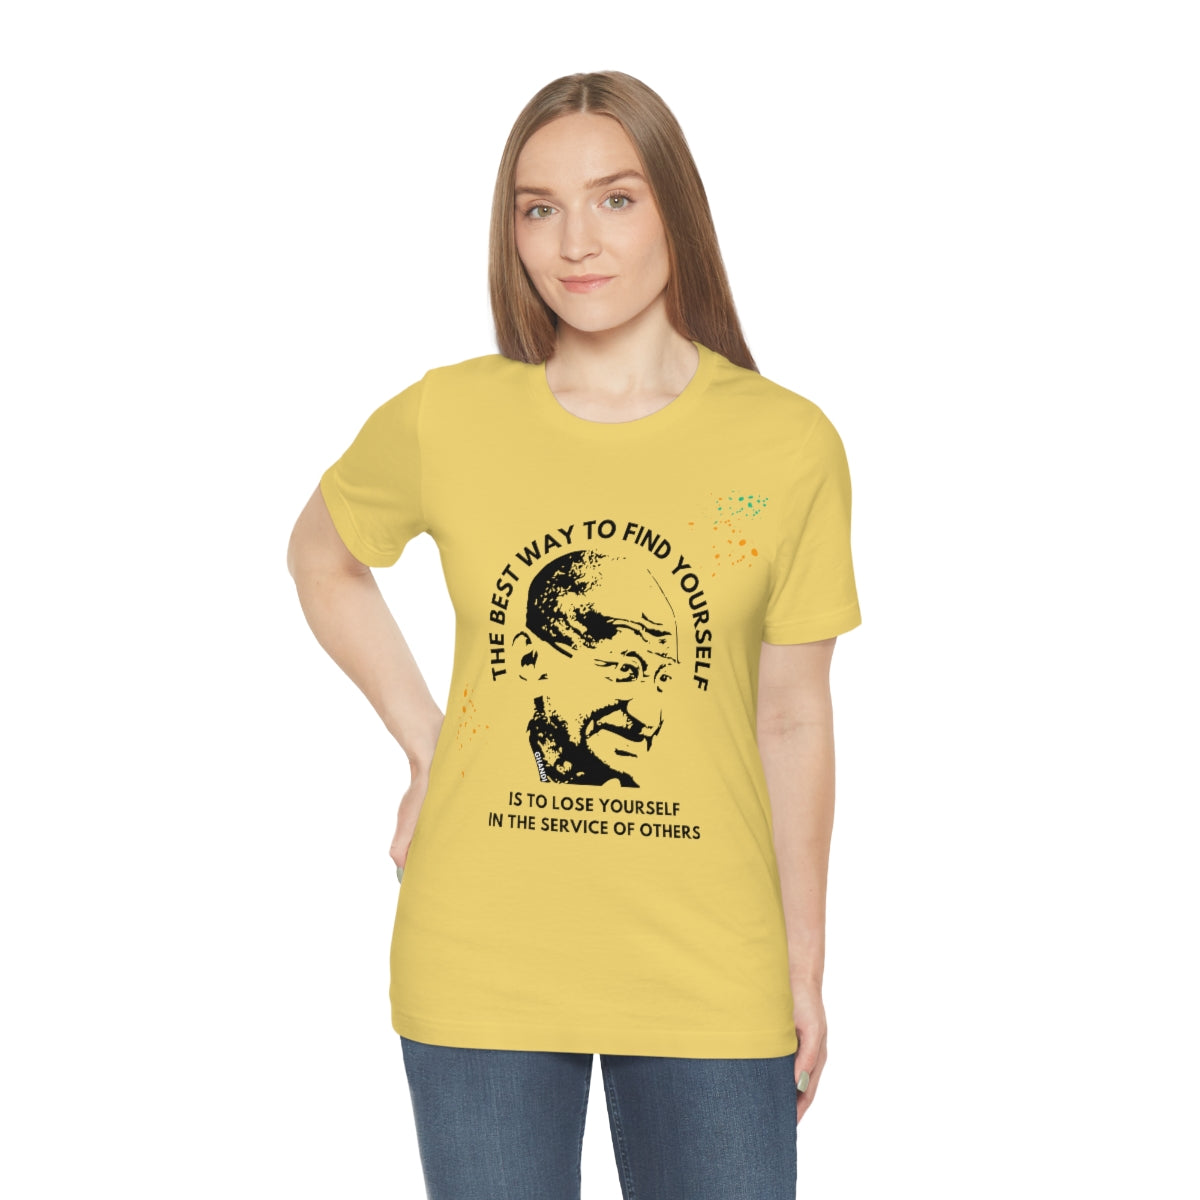 Ghandi T shirts, Best Way To Find Yourself Quote Ghandi Shirts, Statement Tees, Serve Others Shirts